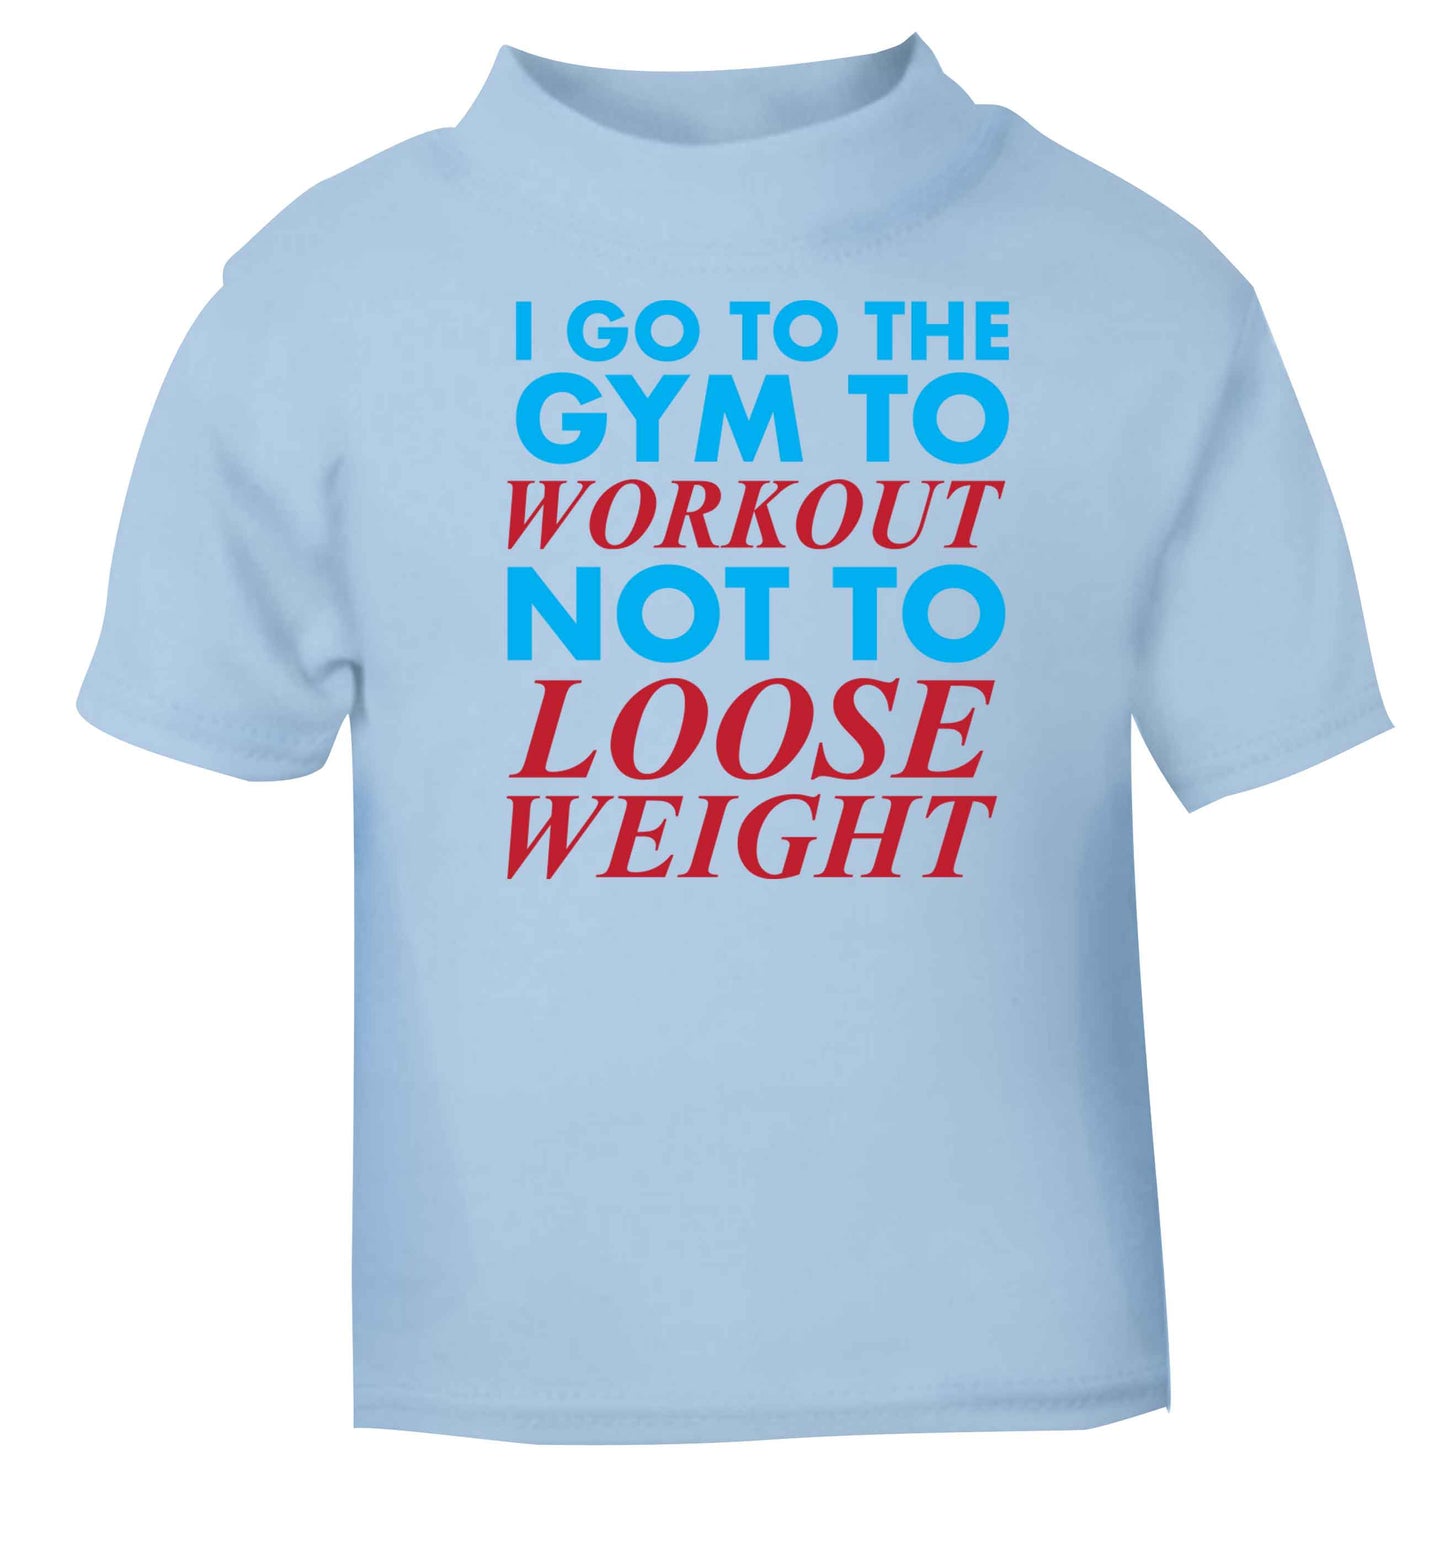 I go to the gym to workout not to loose weight light blue baby toddler Tshirt 2 Years